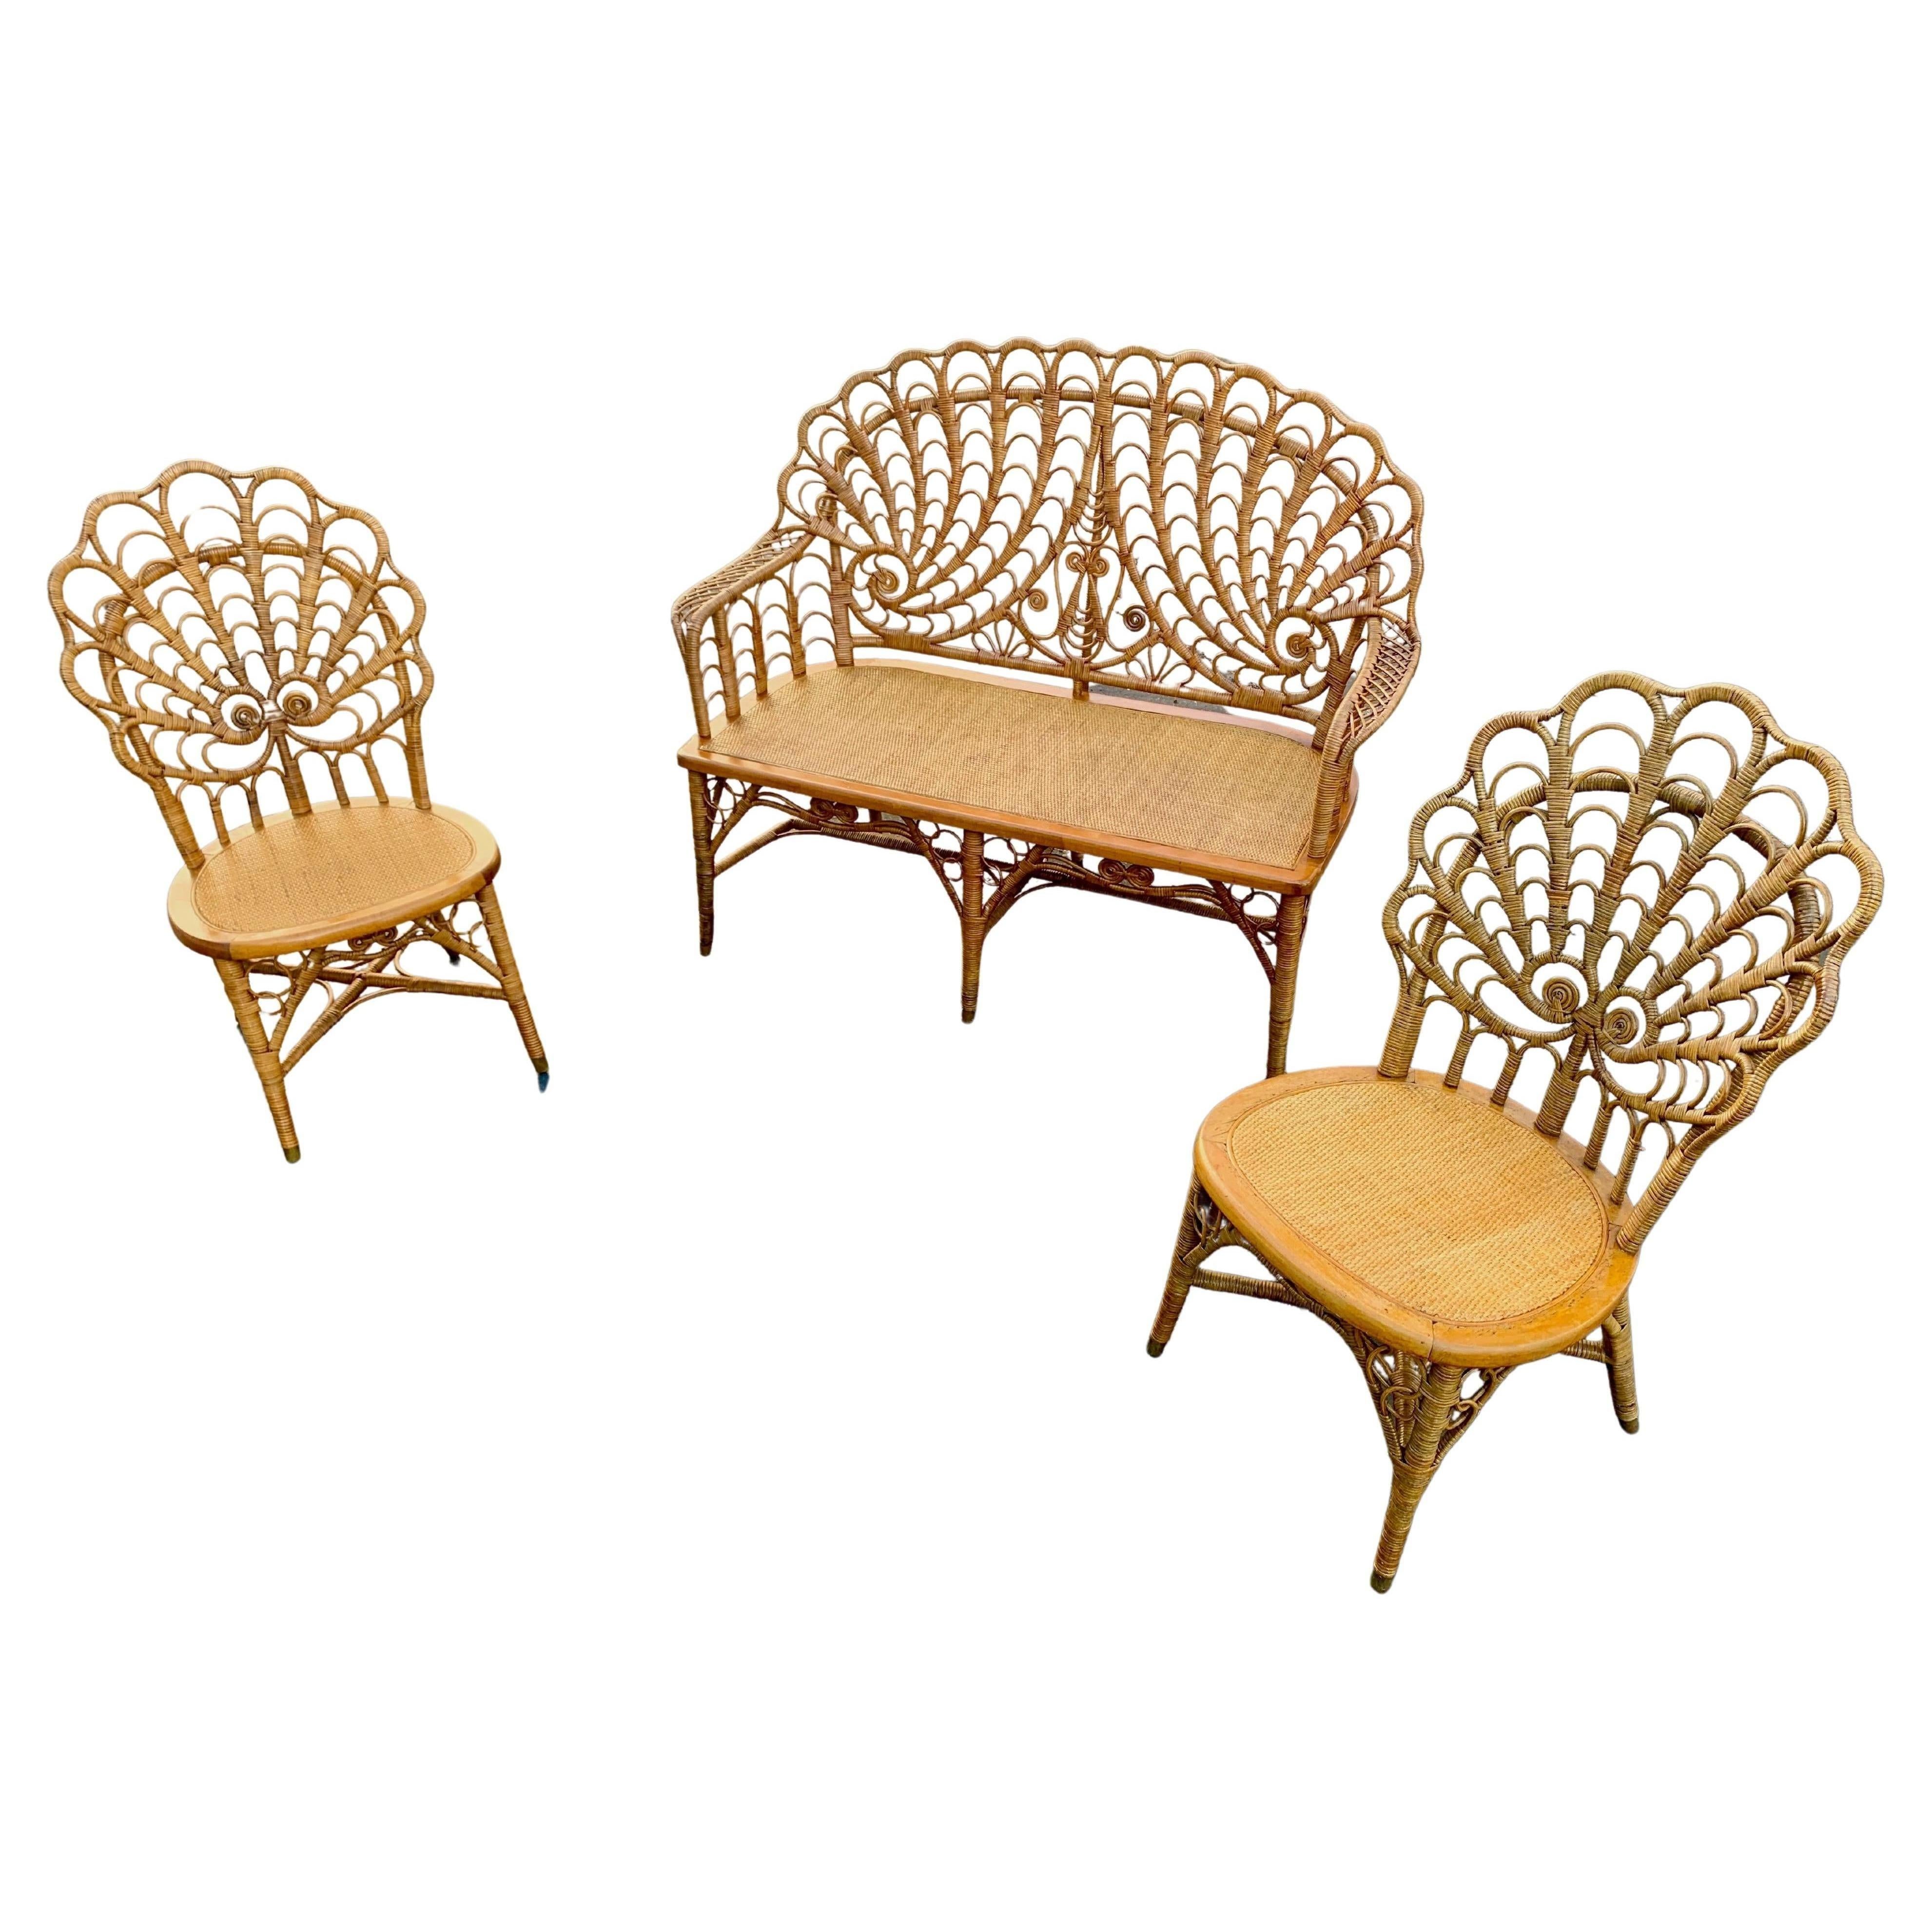 A rare suite of antique Heywood Brothers wicker furniture, American,C. 1890s,Gardner, Massachusetts.This antique suite is in a beautiful natural finish. It is woven in what is often called a shell back design because of it's chair backs having a